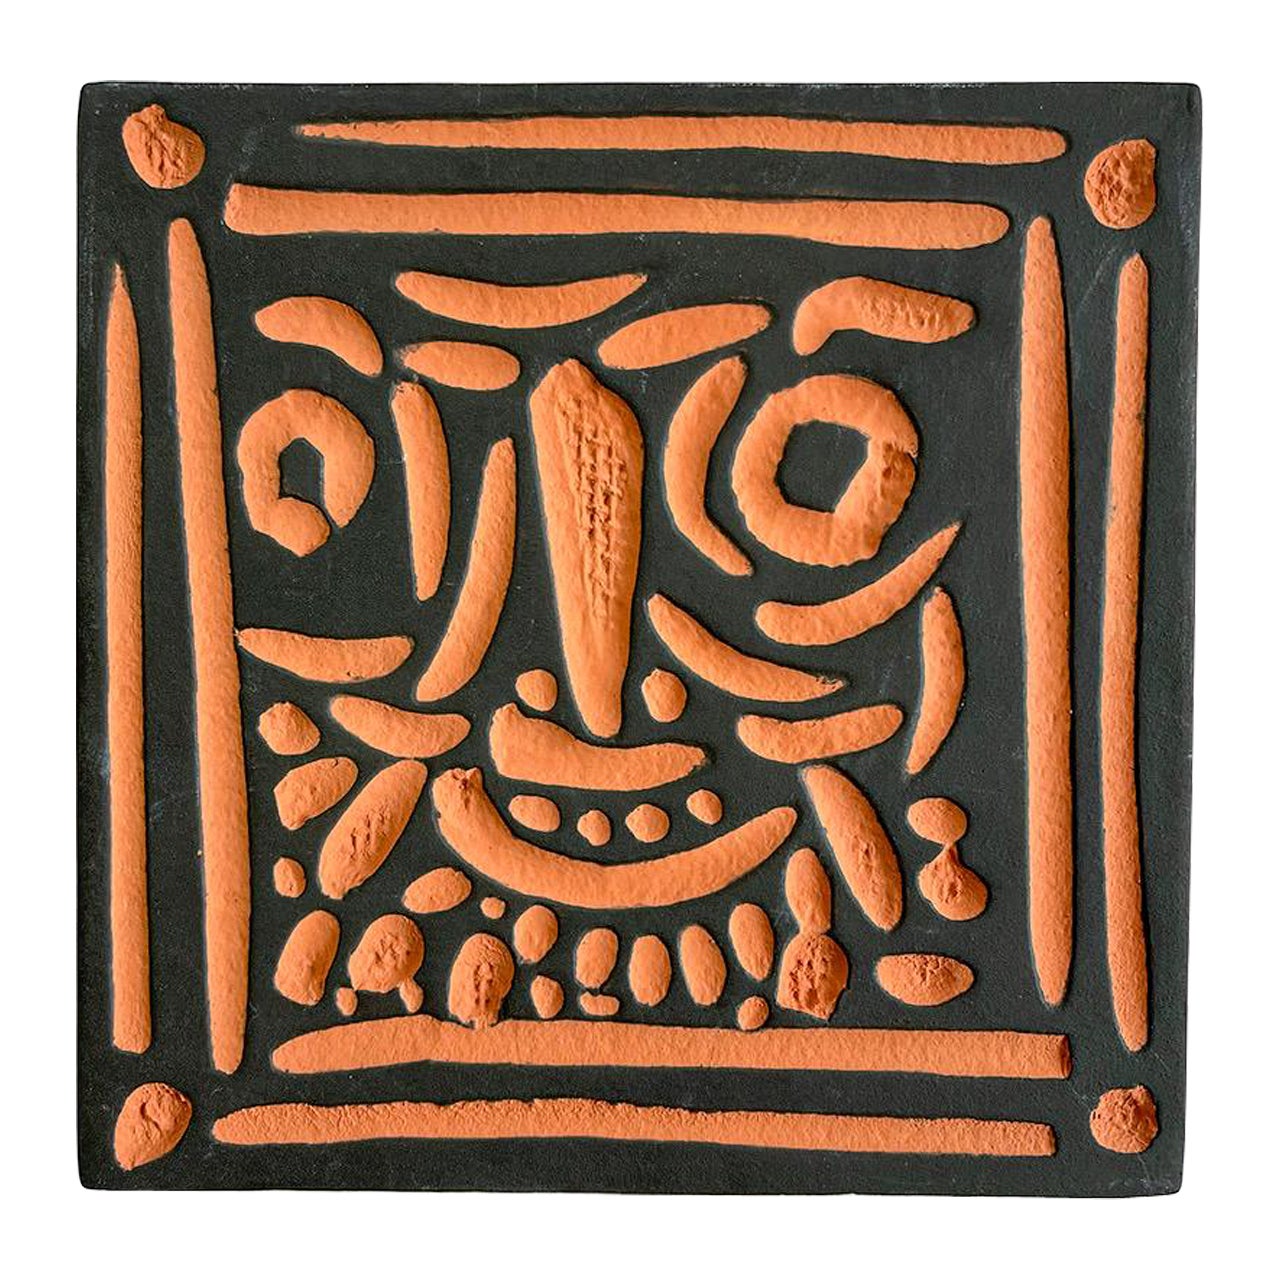 Pablo Picasso Tile Little Bearded Face Madoura Ceramic Square Tile 1968 For Sale